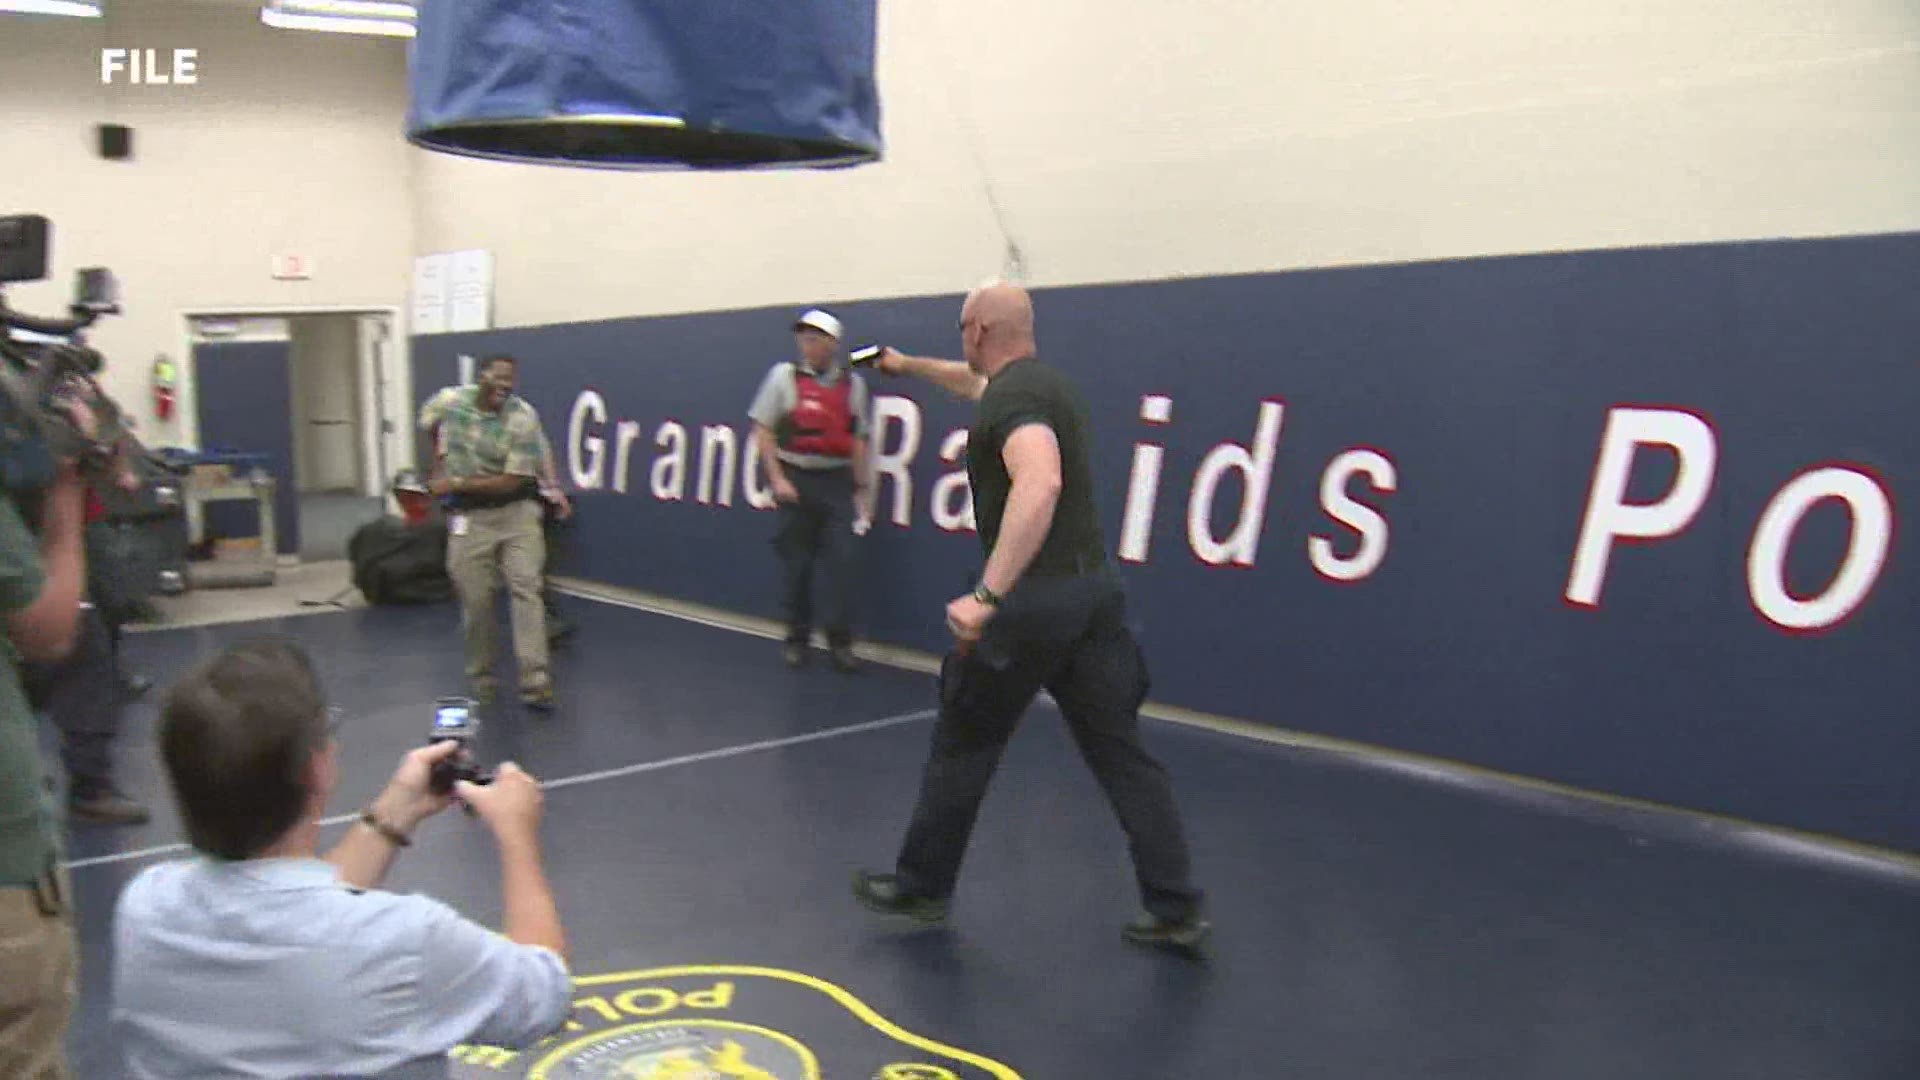 A fall program with the Grand Rapids Police Department has been postponed because of COVID-19 restrictions.